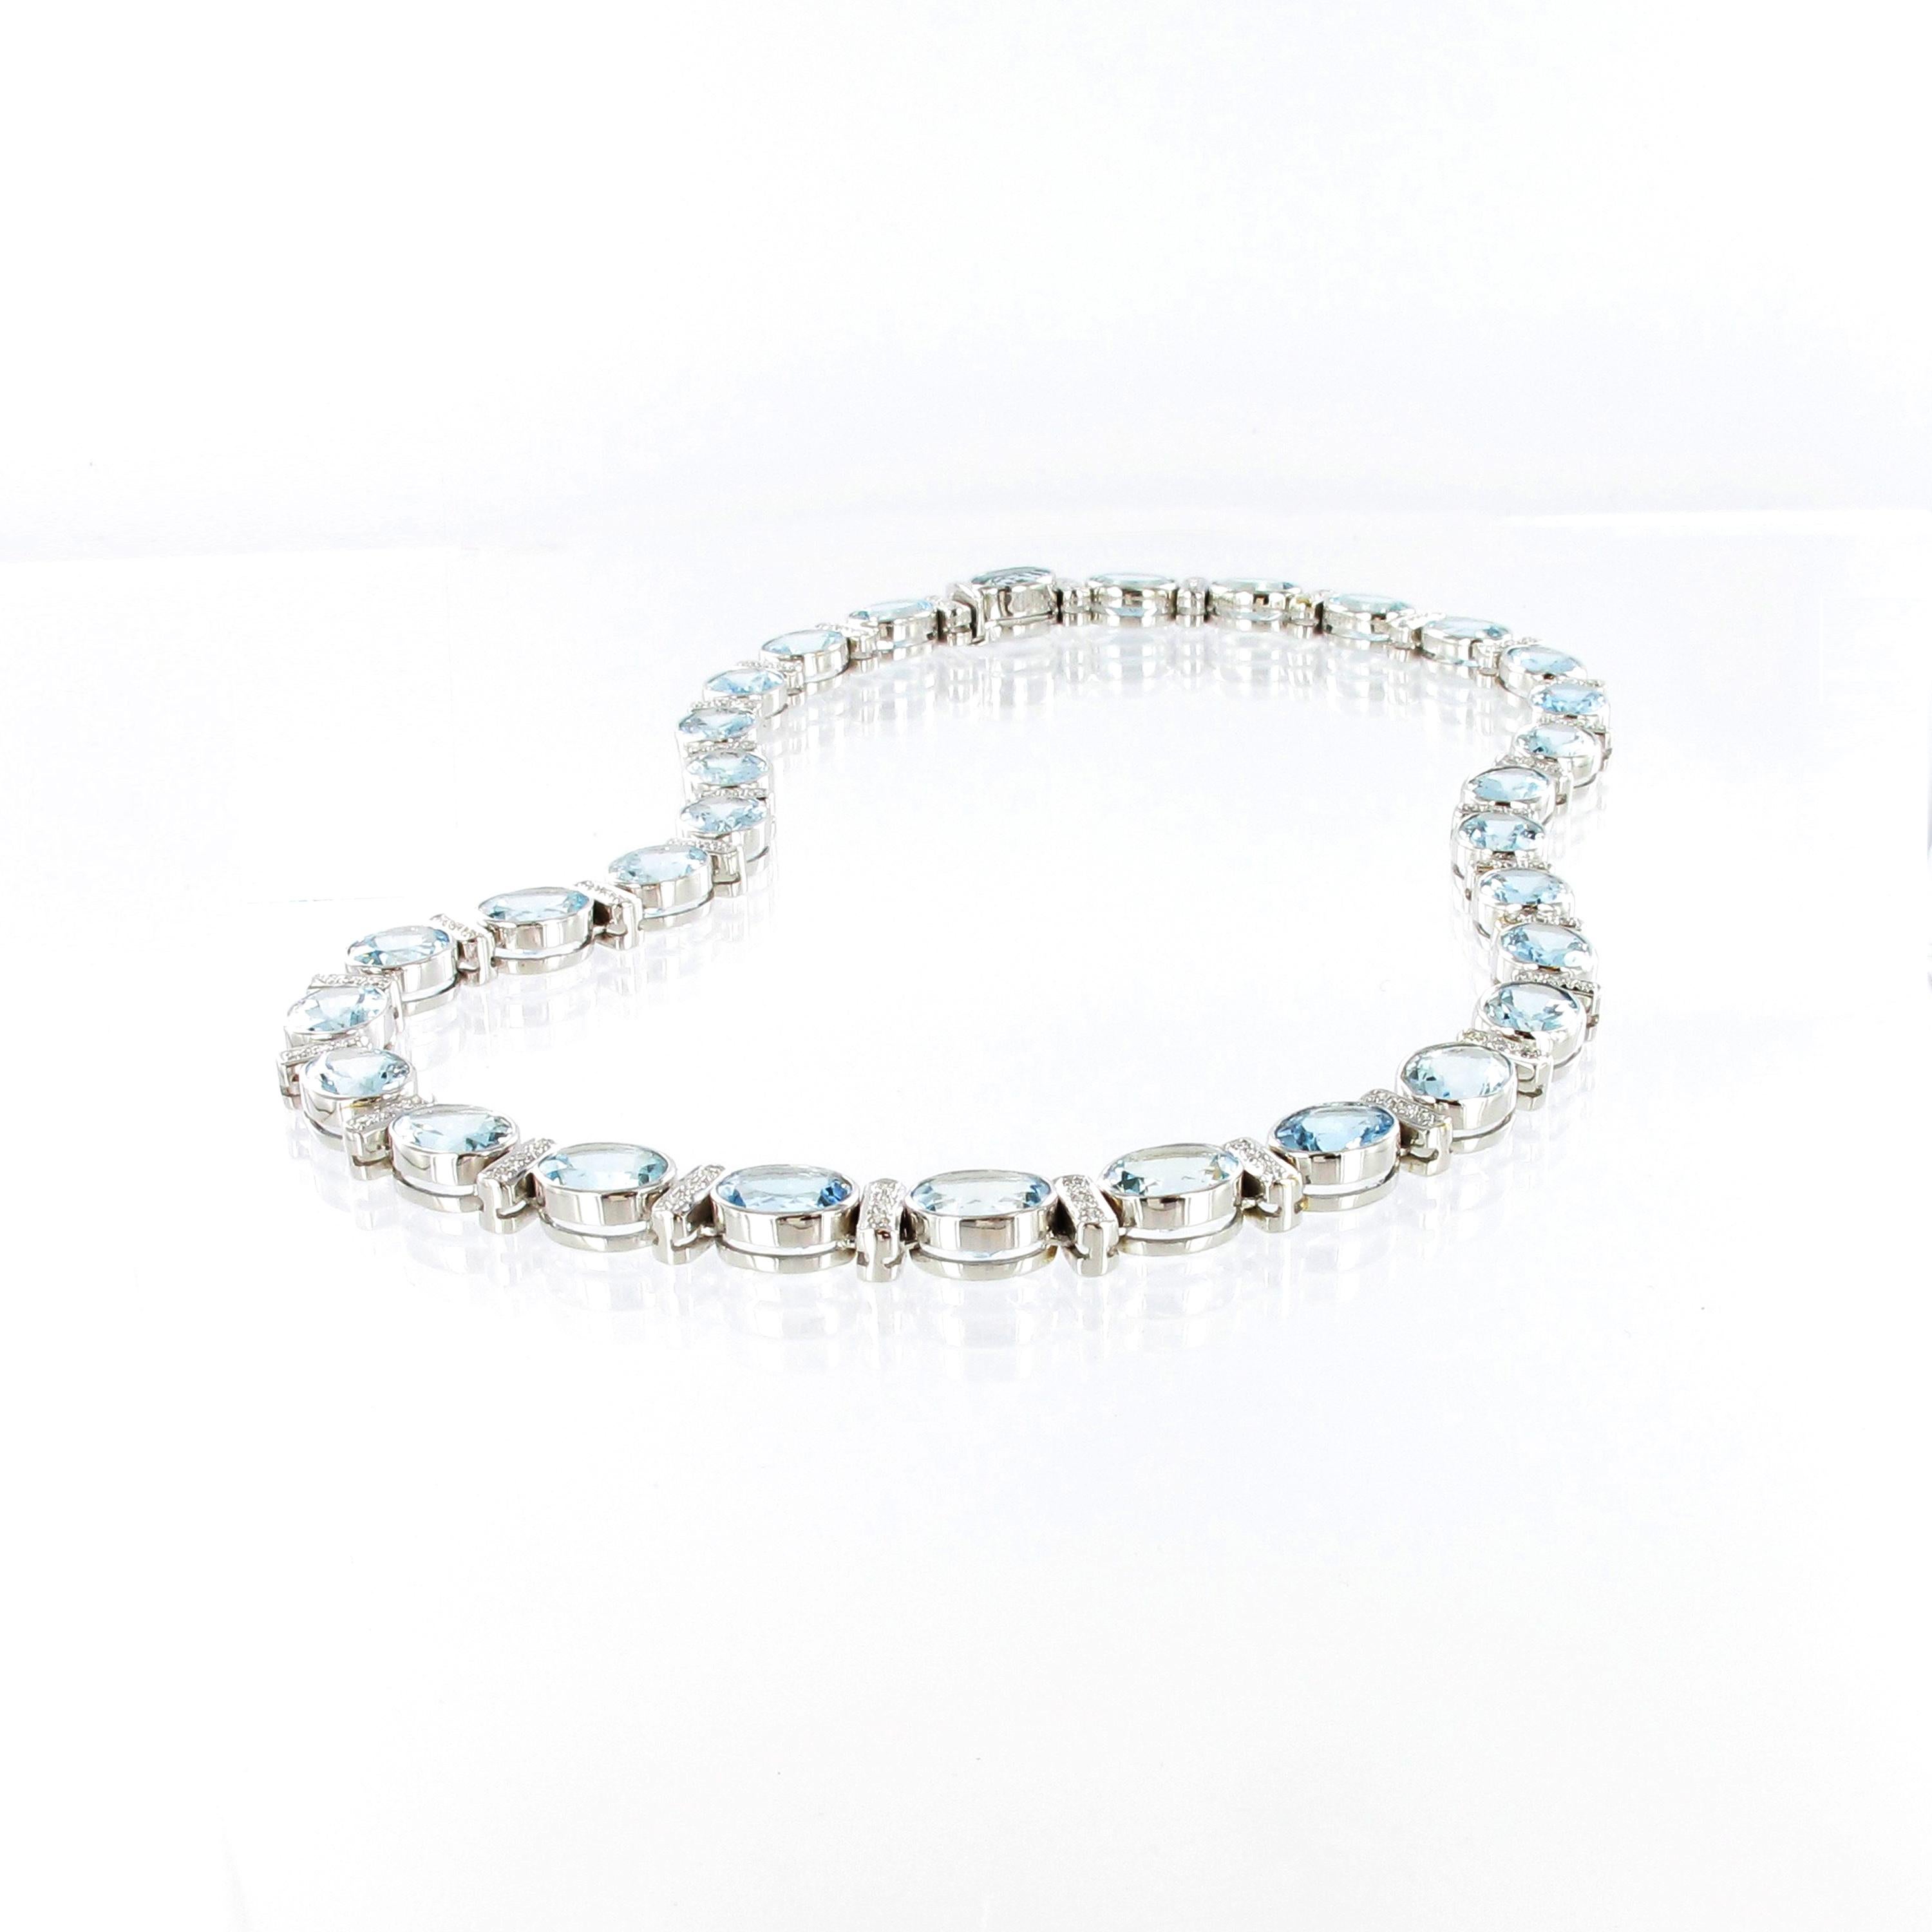 Oval Cut Aquamarine and Diamond Necklace in 18 Karat White Gold